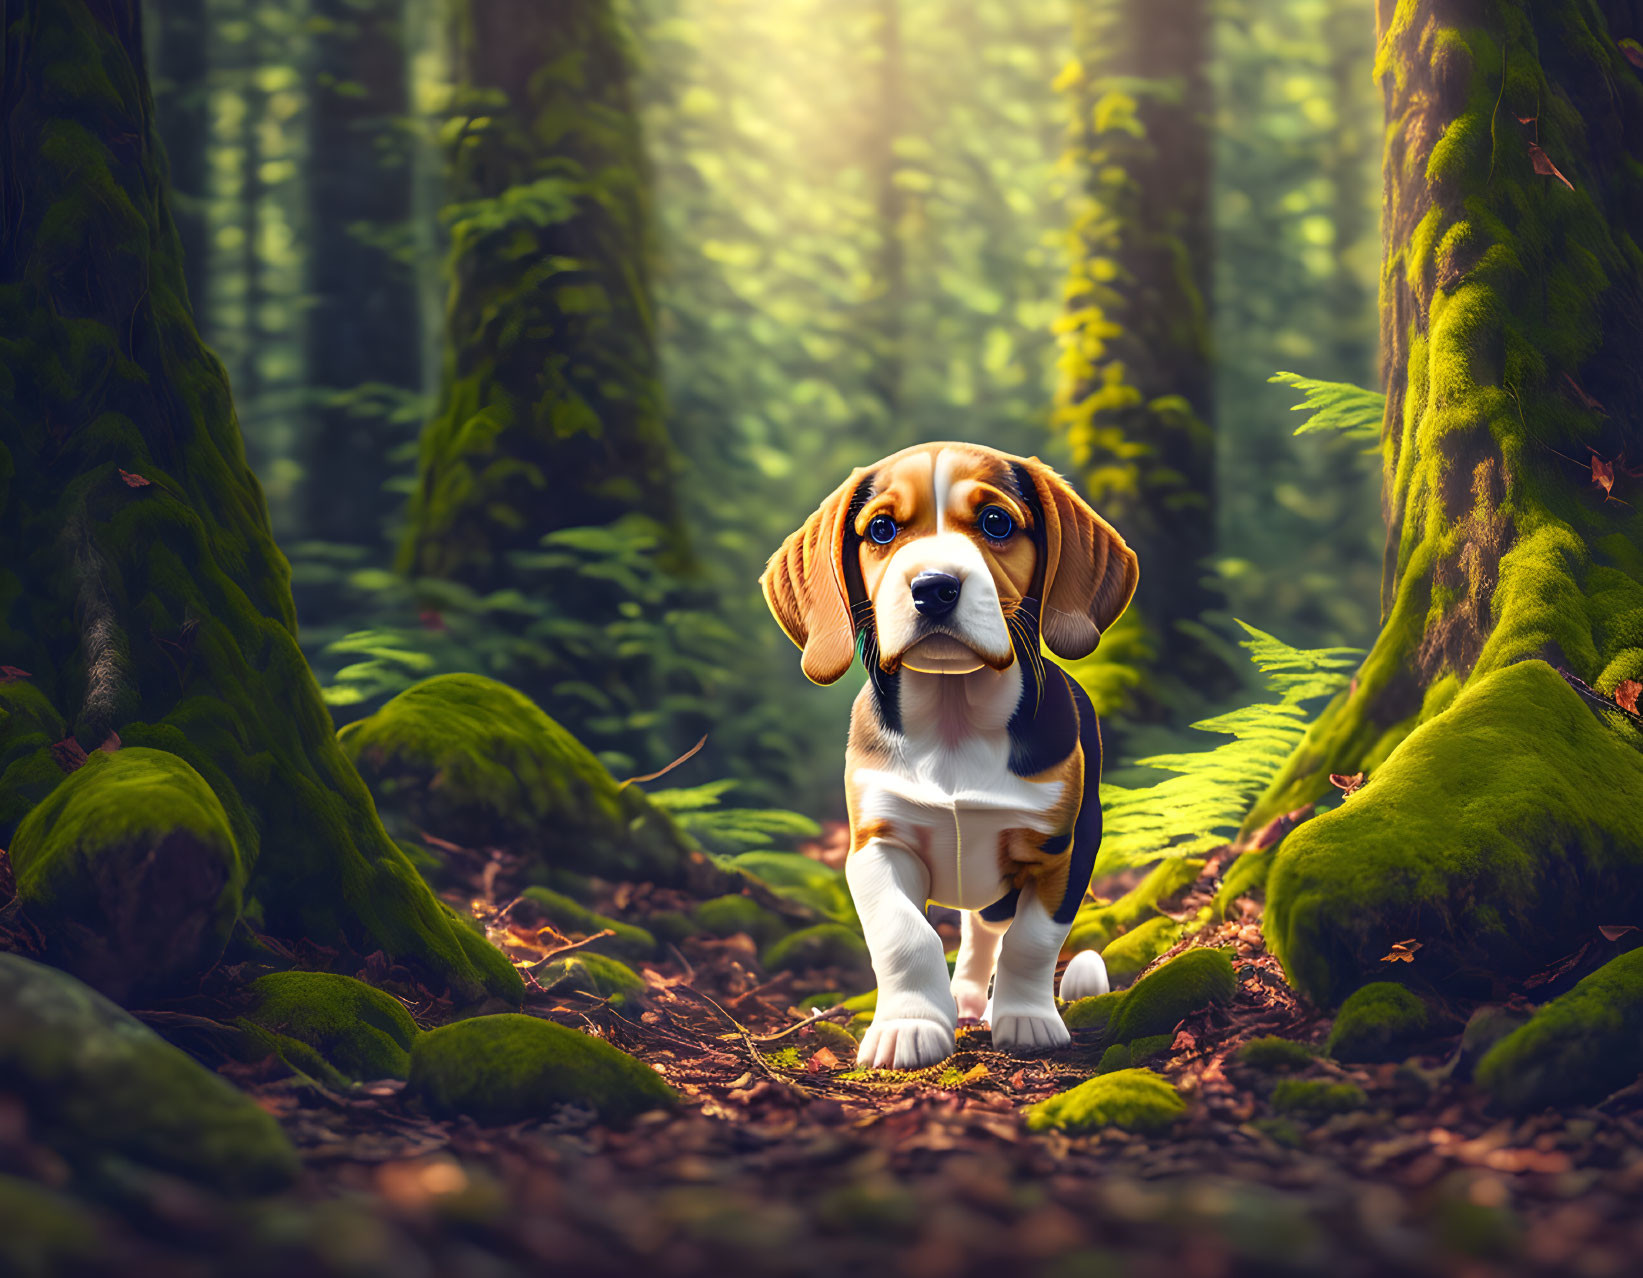 Curious Beagle Puppy in Sunlit Forest with Moss-Covered Trees